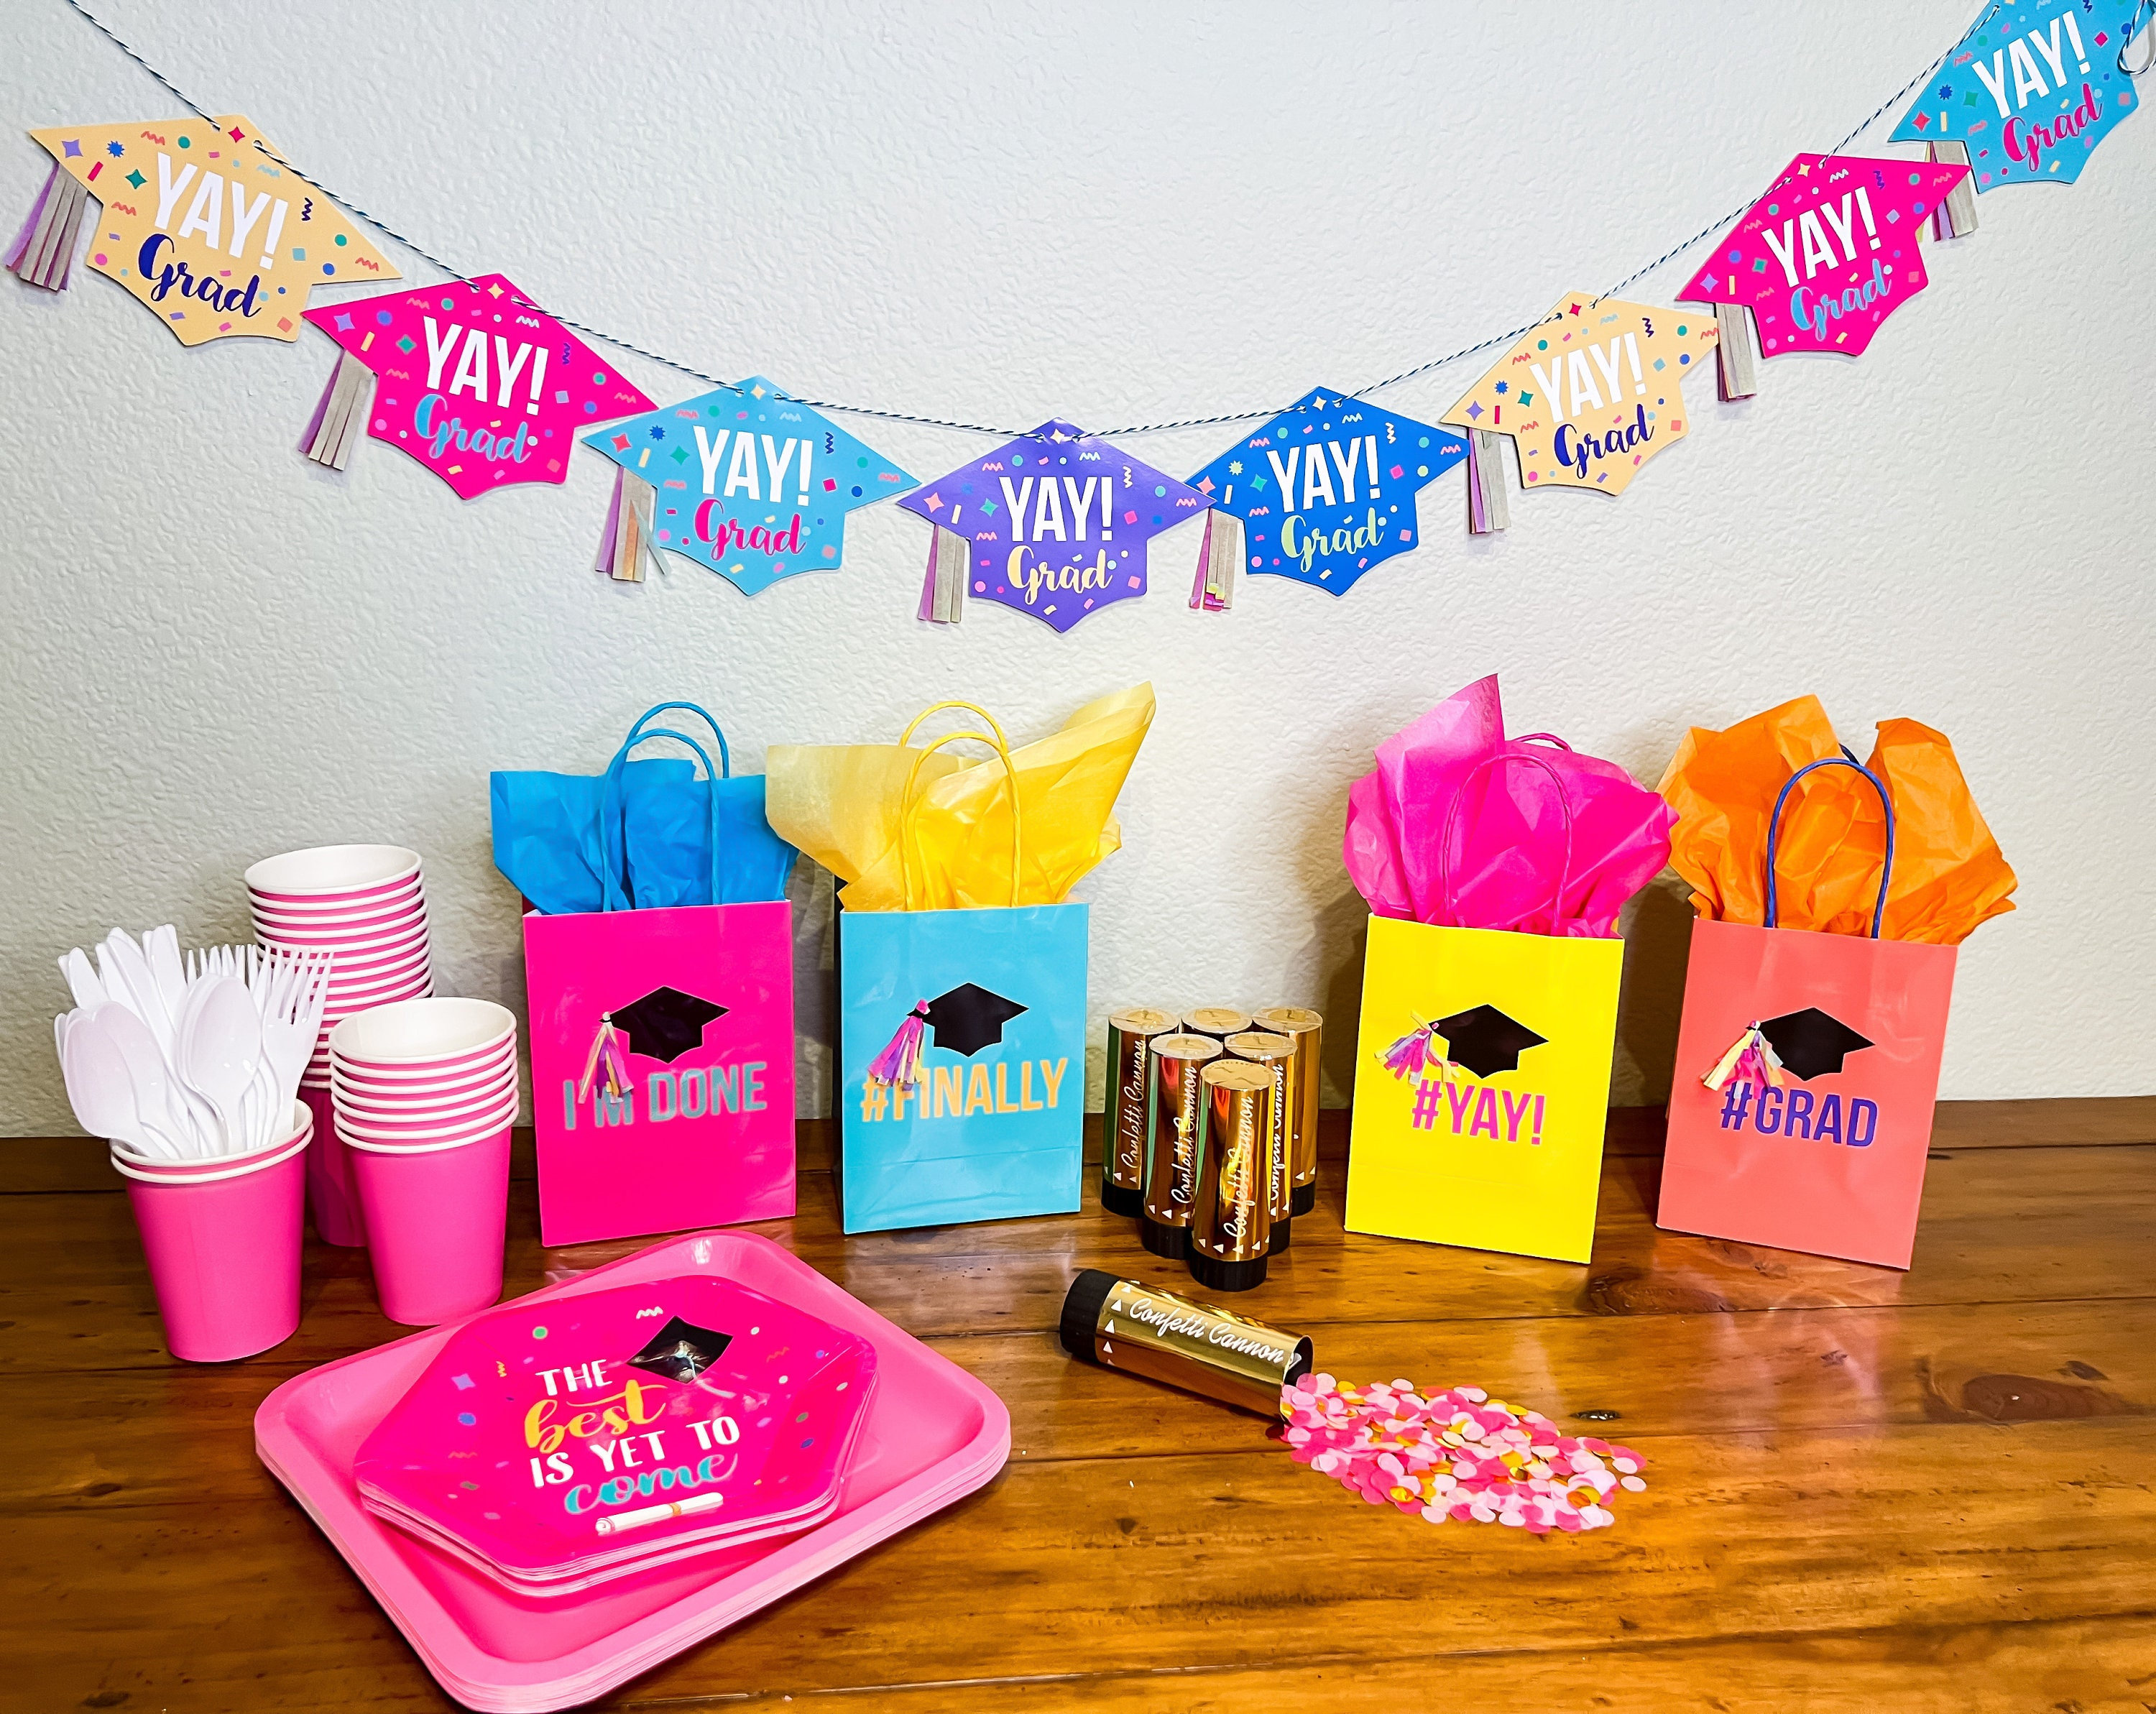 Back to School Gift Bags for Kids - Organize and Decorate Everything